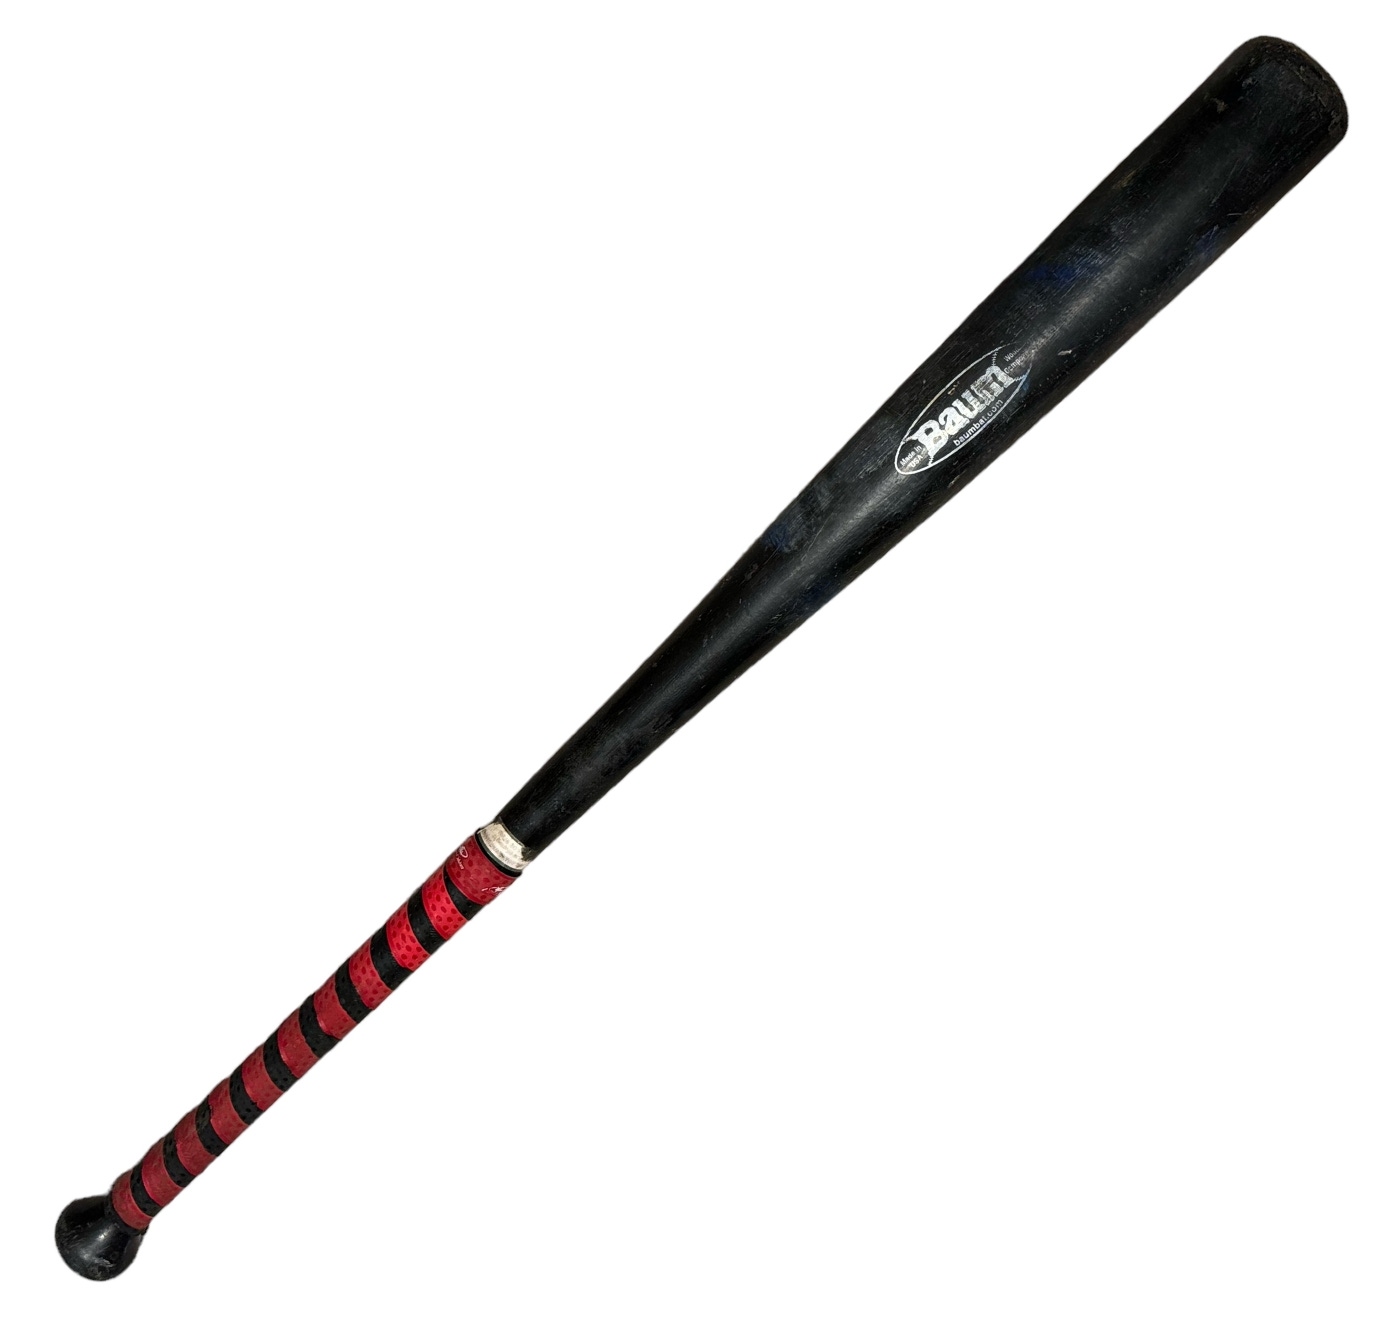 Barley Used Baum Bat. It’s 33.5 inch and 30.5 oz.  Ball jumps off the barrel.